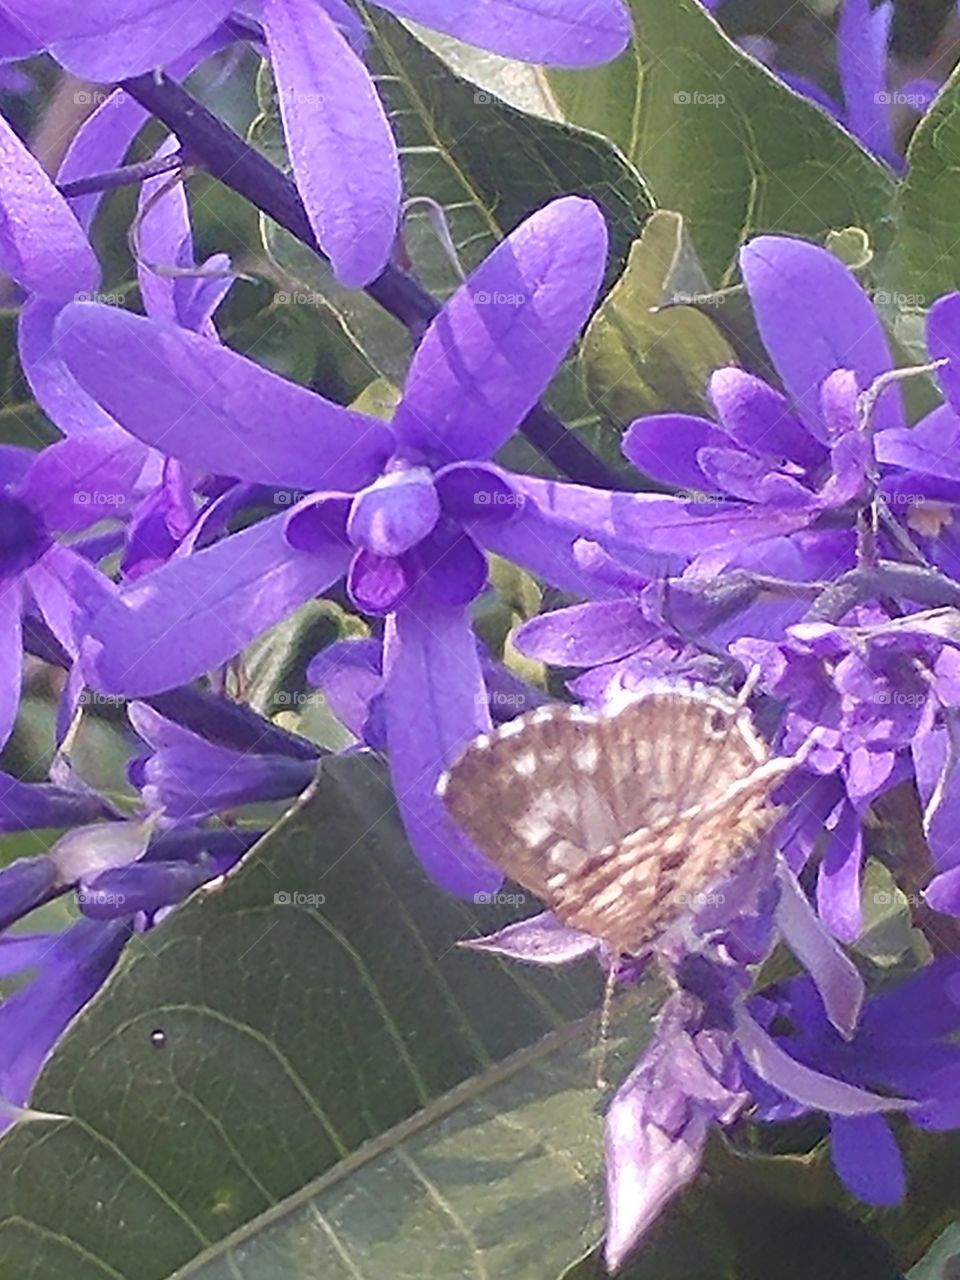 A common blue butterfly settling down on a flourishing blooming lilac blue Petrea shrub.